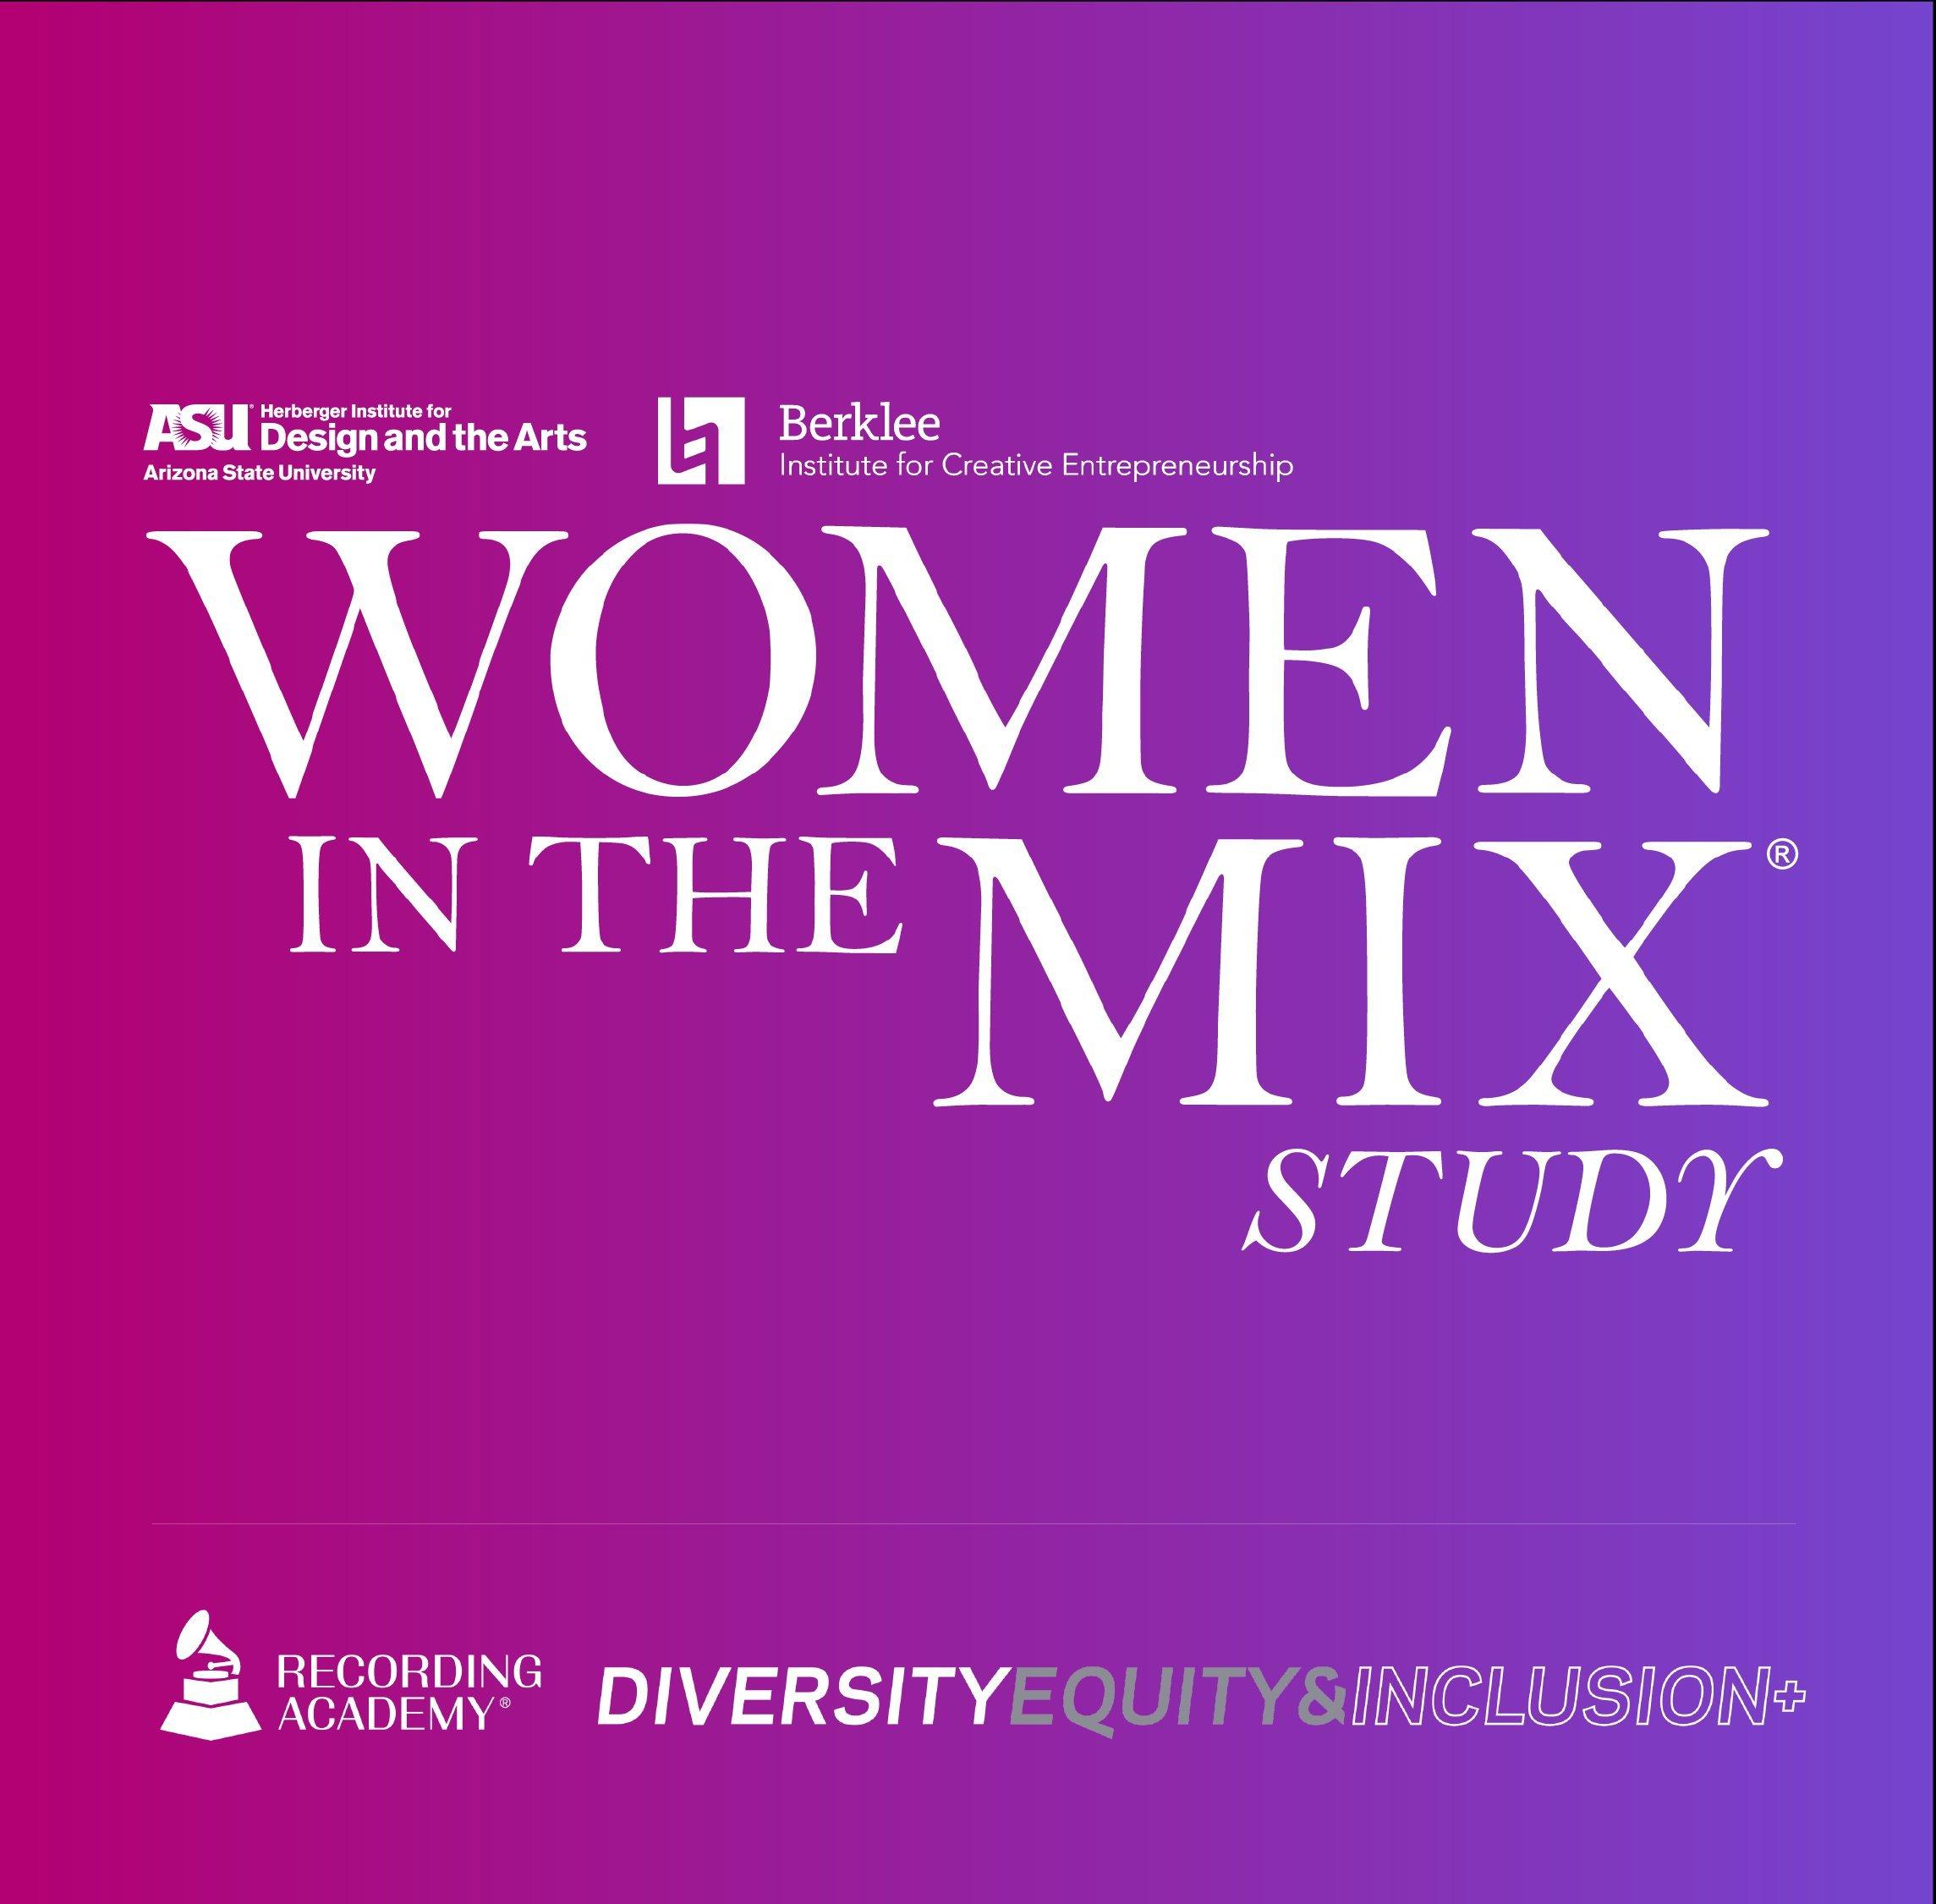 Artwork for the Recording Academy's 2021 Women In The Mix Study